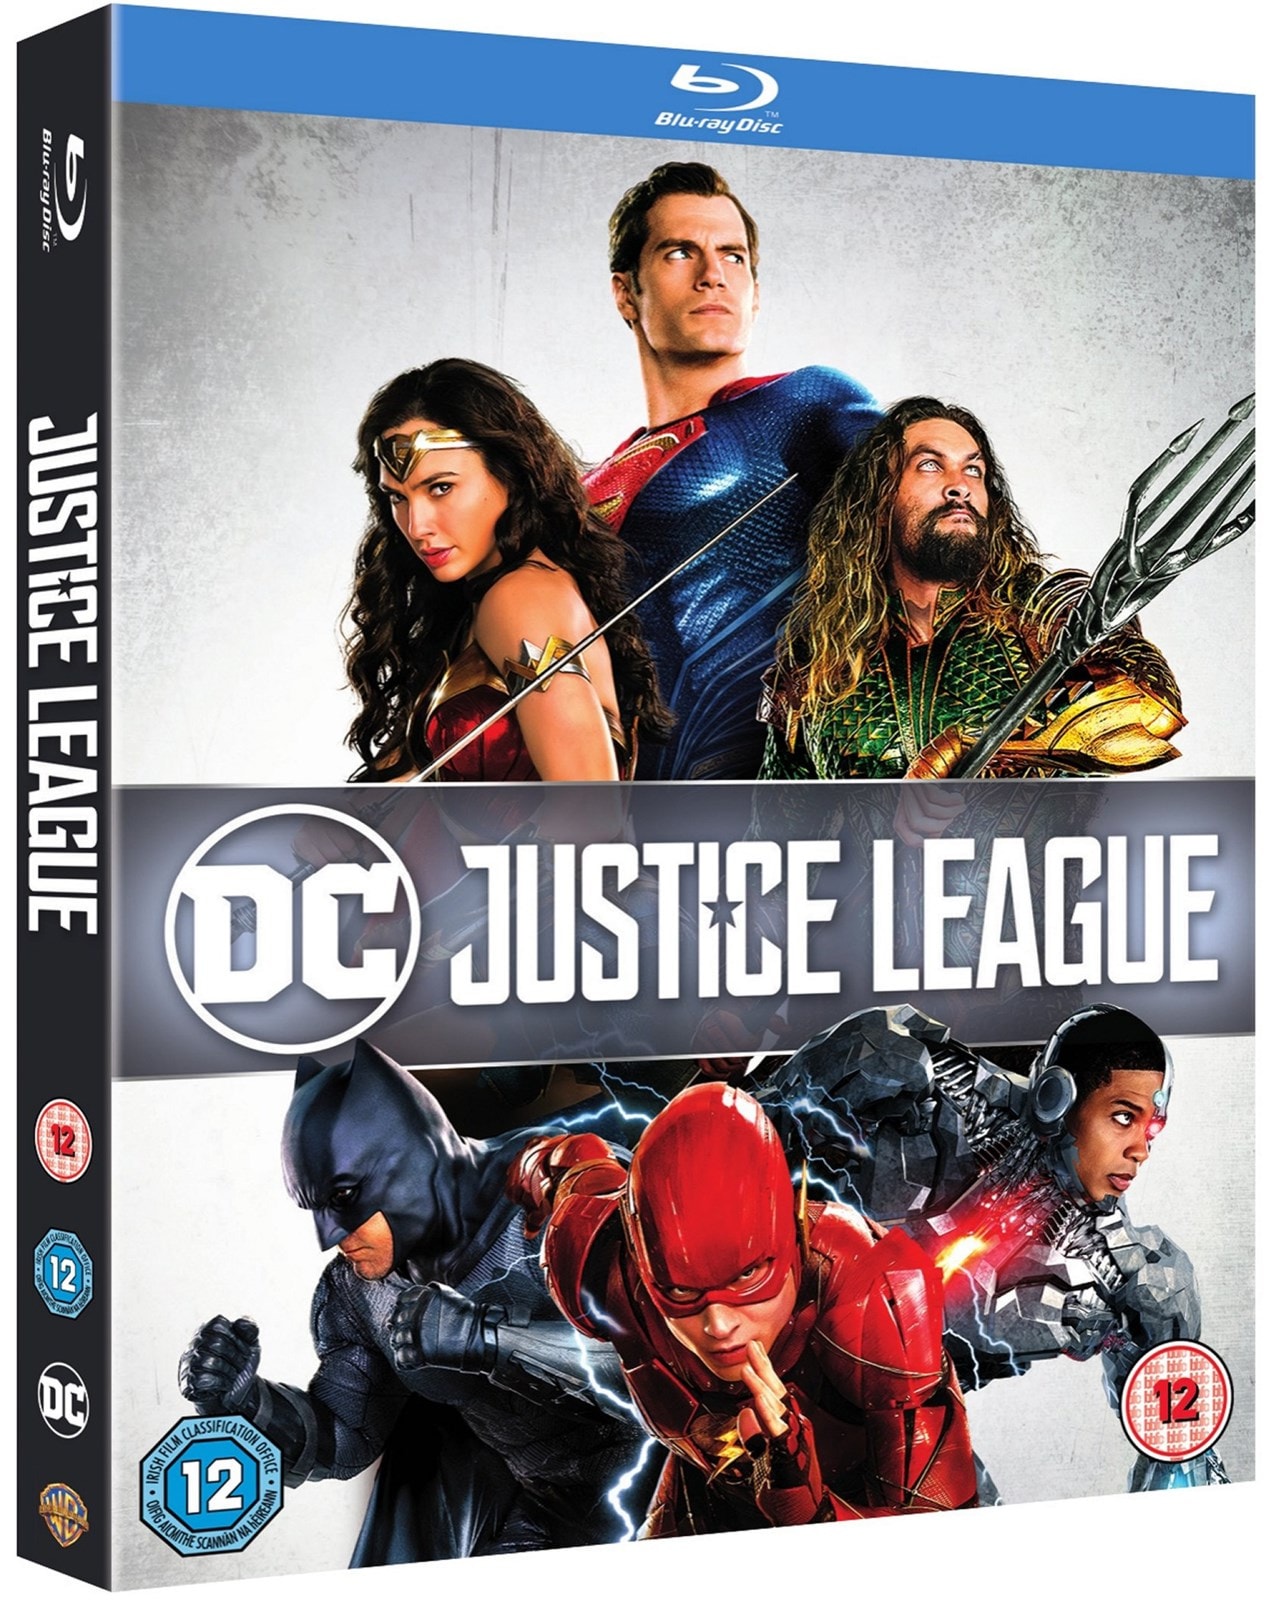 Justice League Blu Ray Free Shipping Over 20 Hmv Store